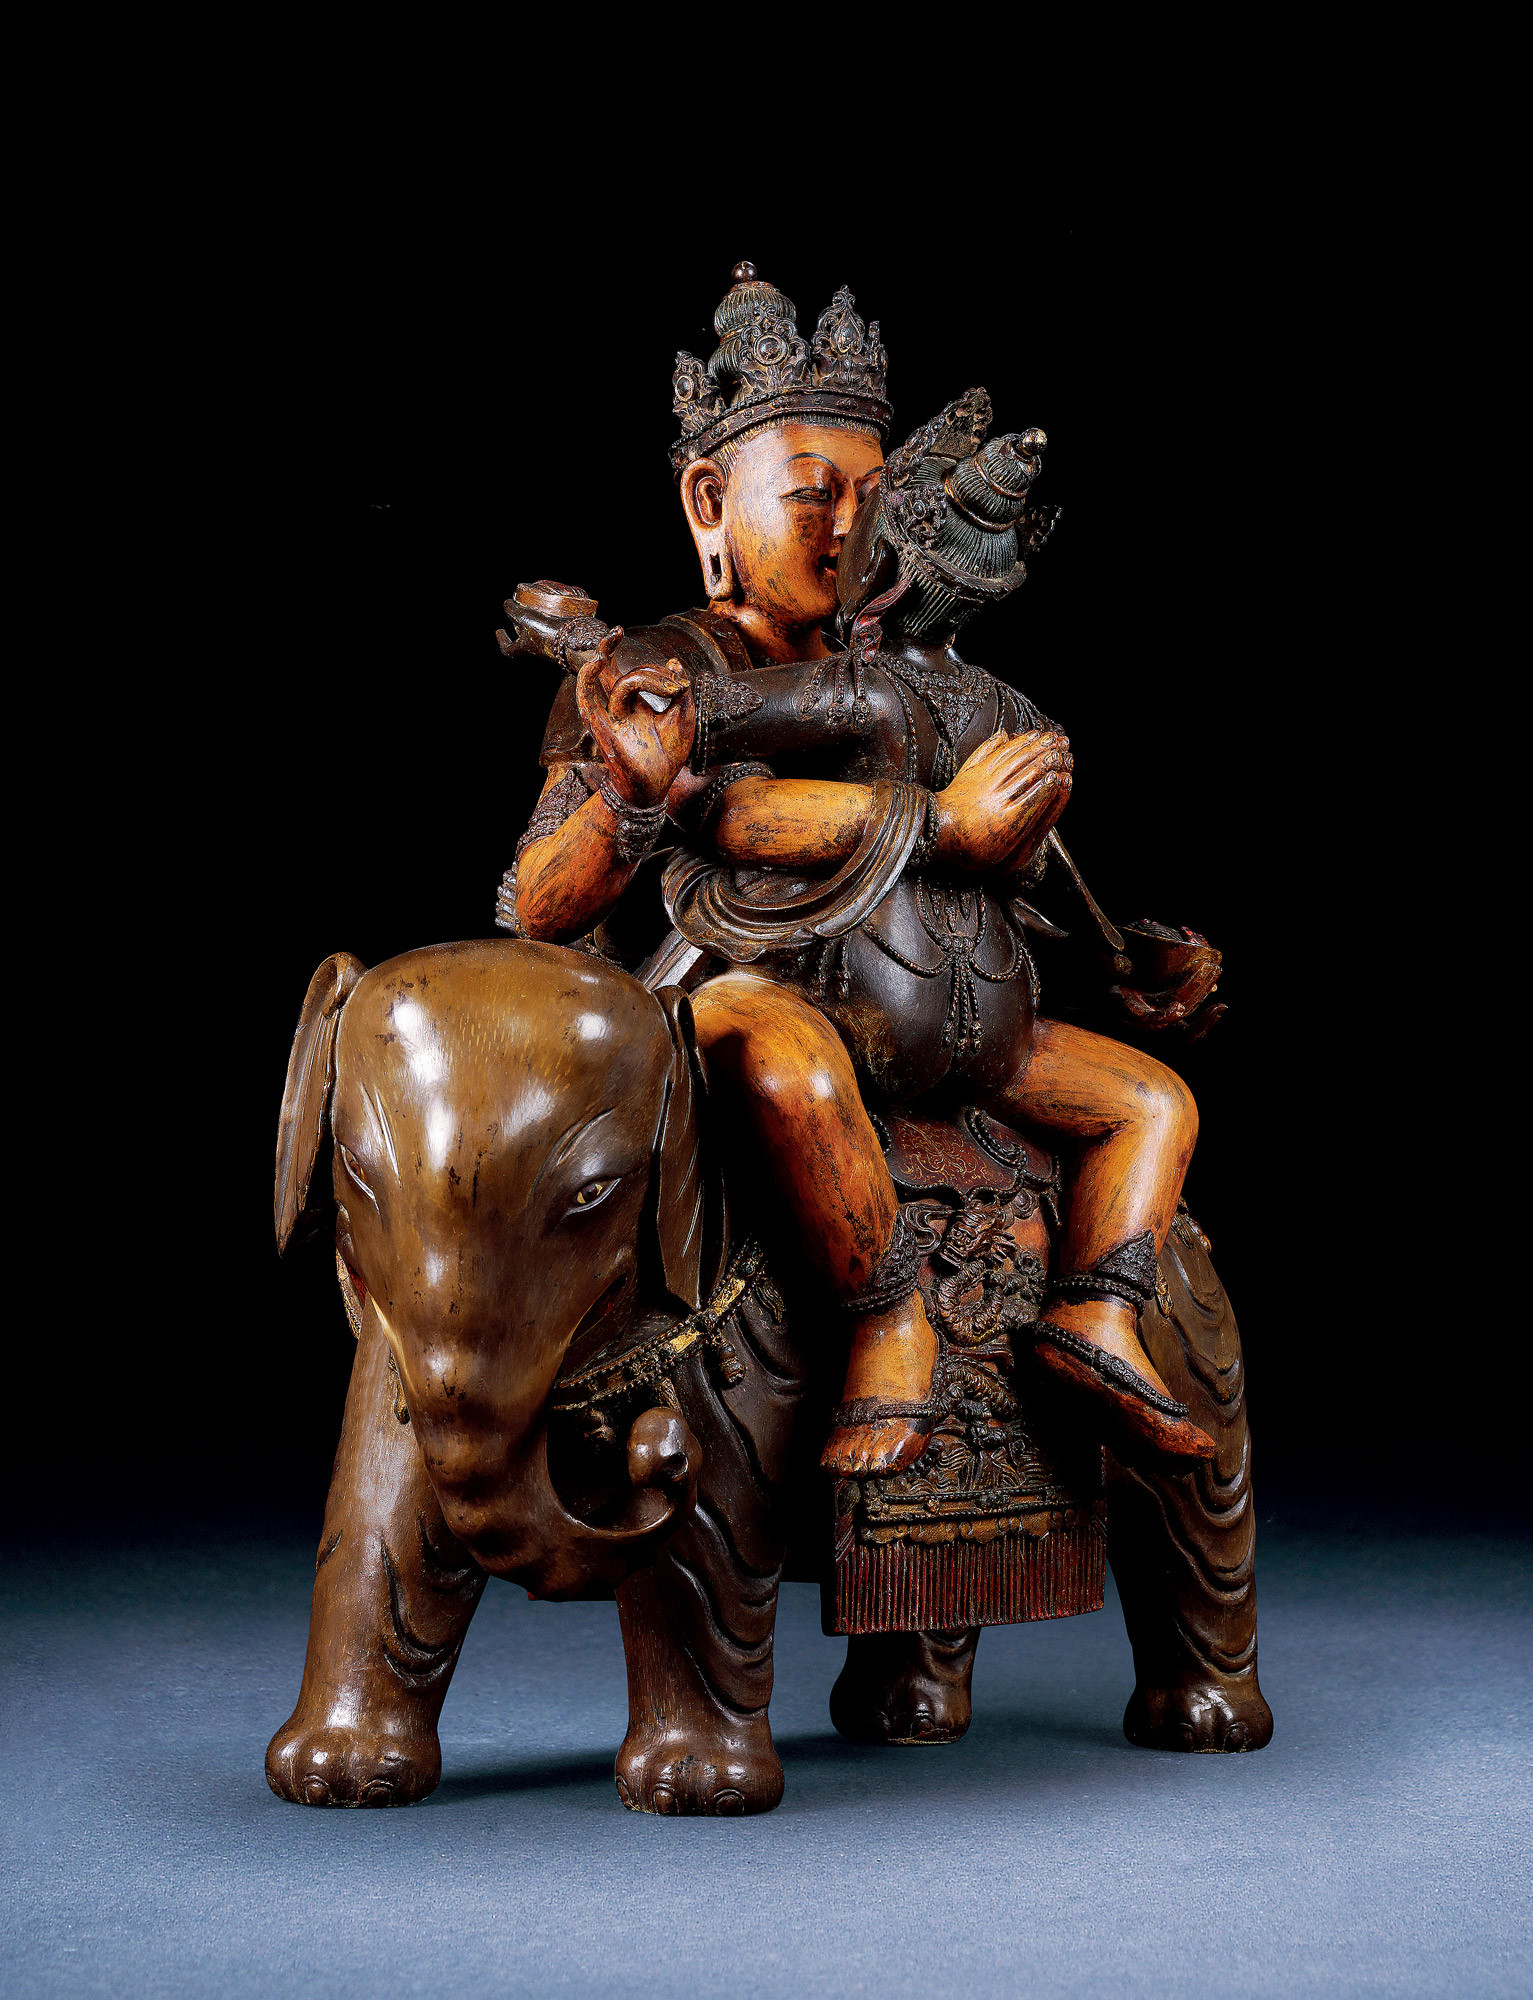 A GILT-LACQUERED SEATED SCULPTURE OF BUDDHA RIDING AN ELEPHANT